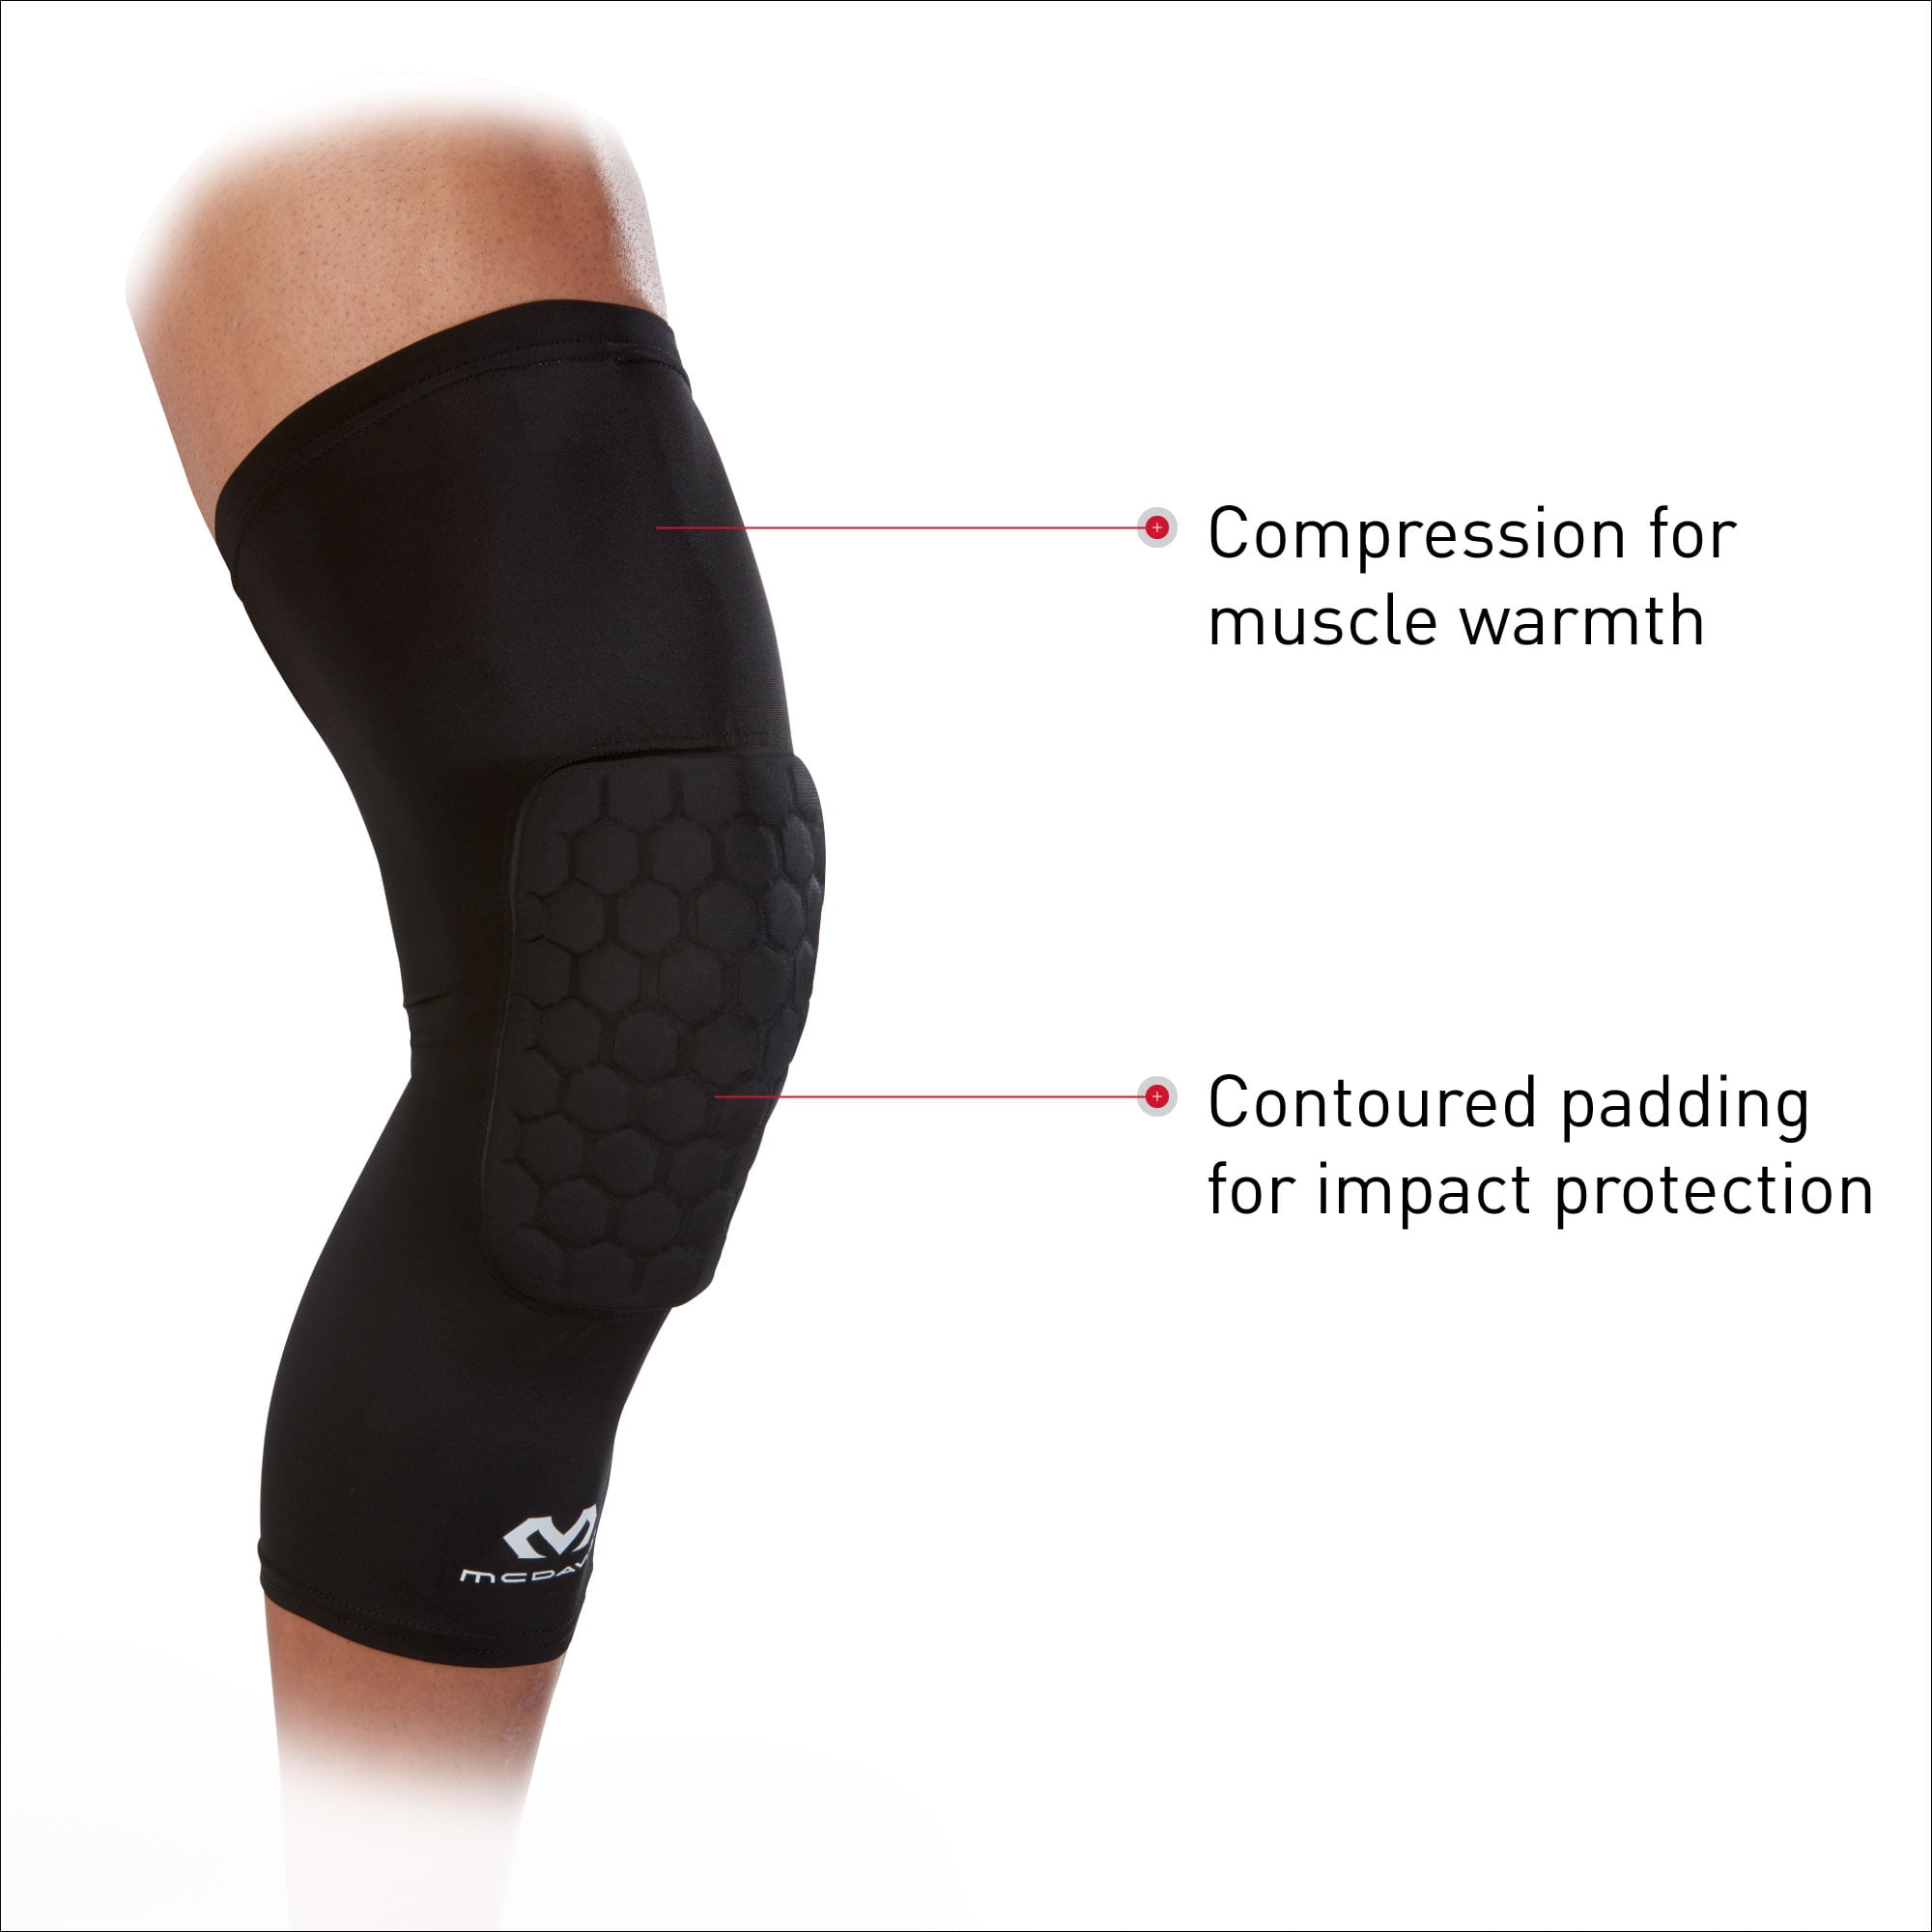 UHBGT Knee Sleeve Pads Protective Compression Brace Support Padding Bands for Crashproof Cycling Basketball 1pcs 